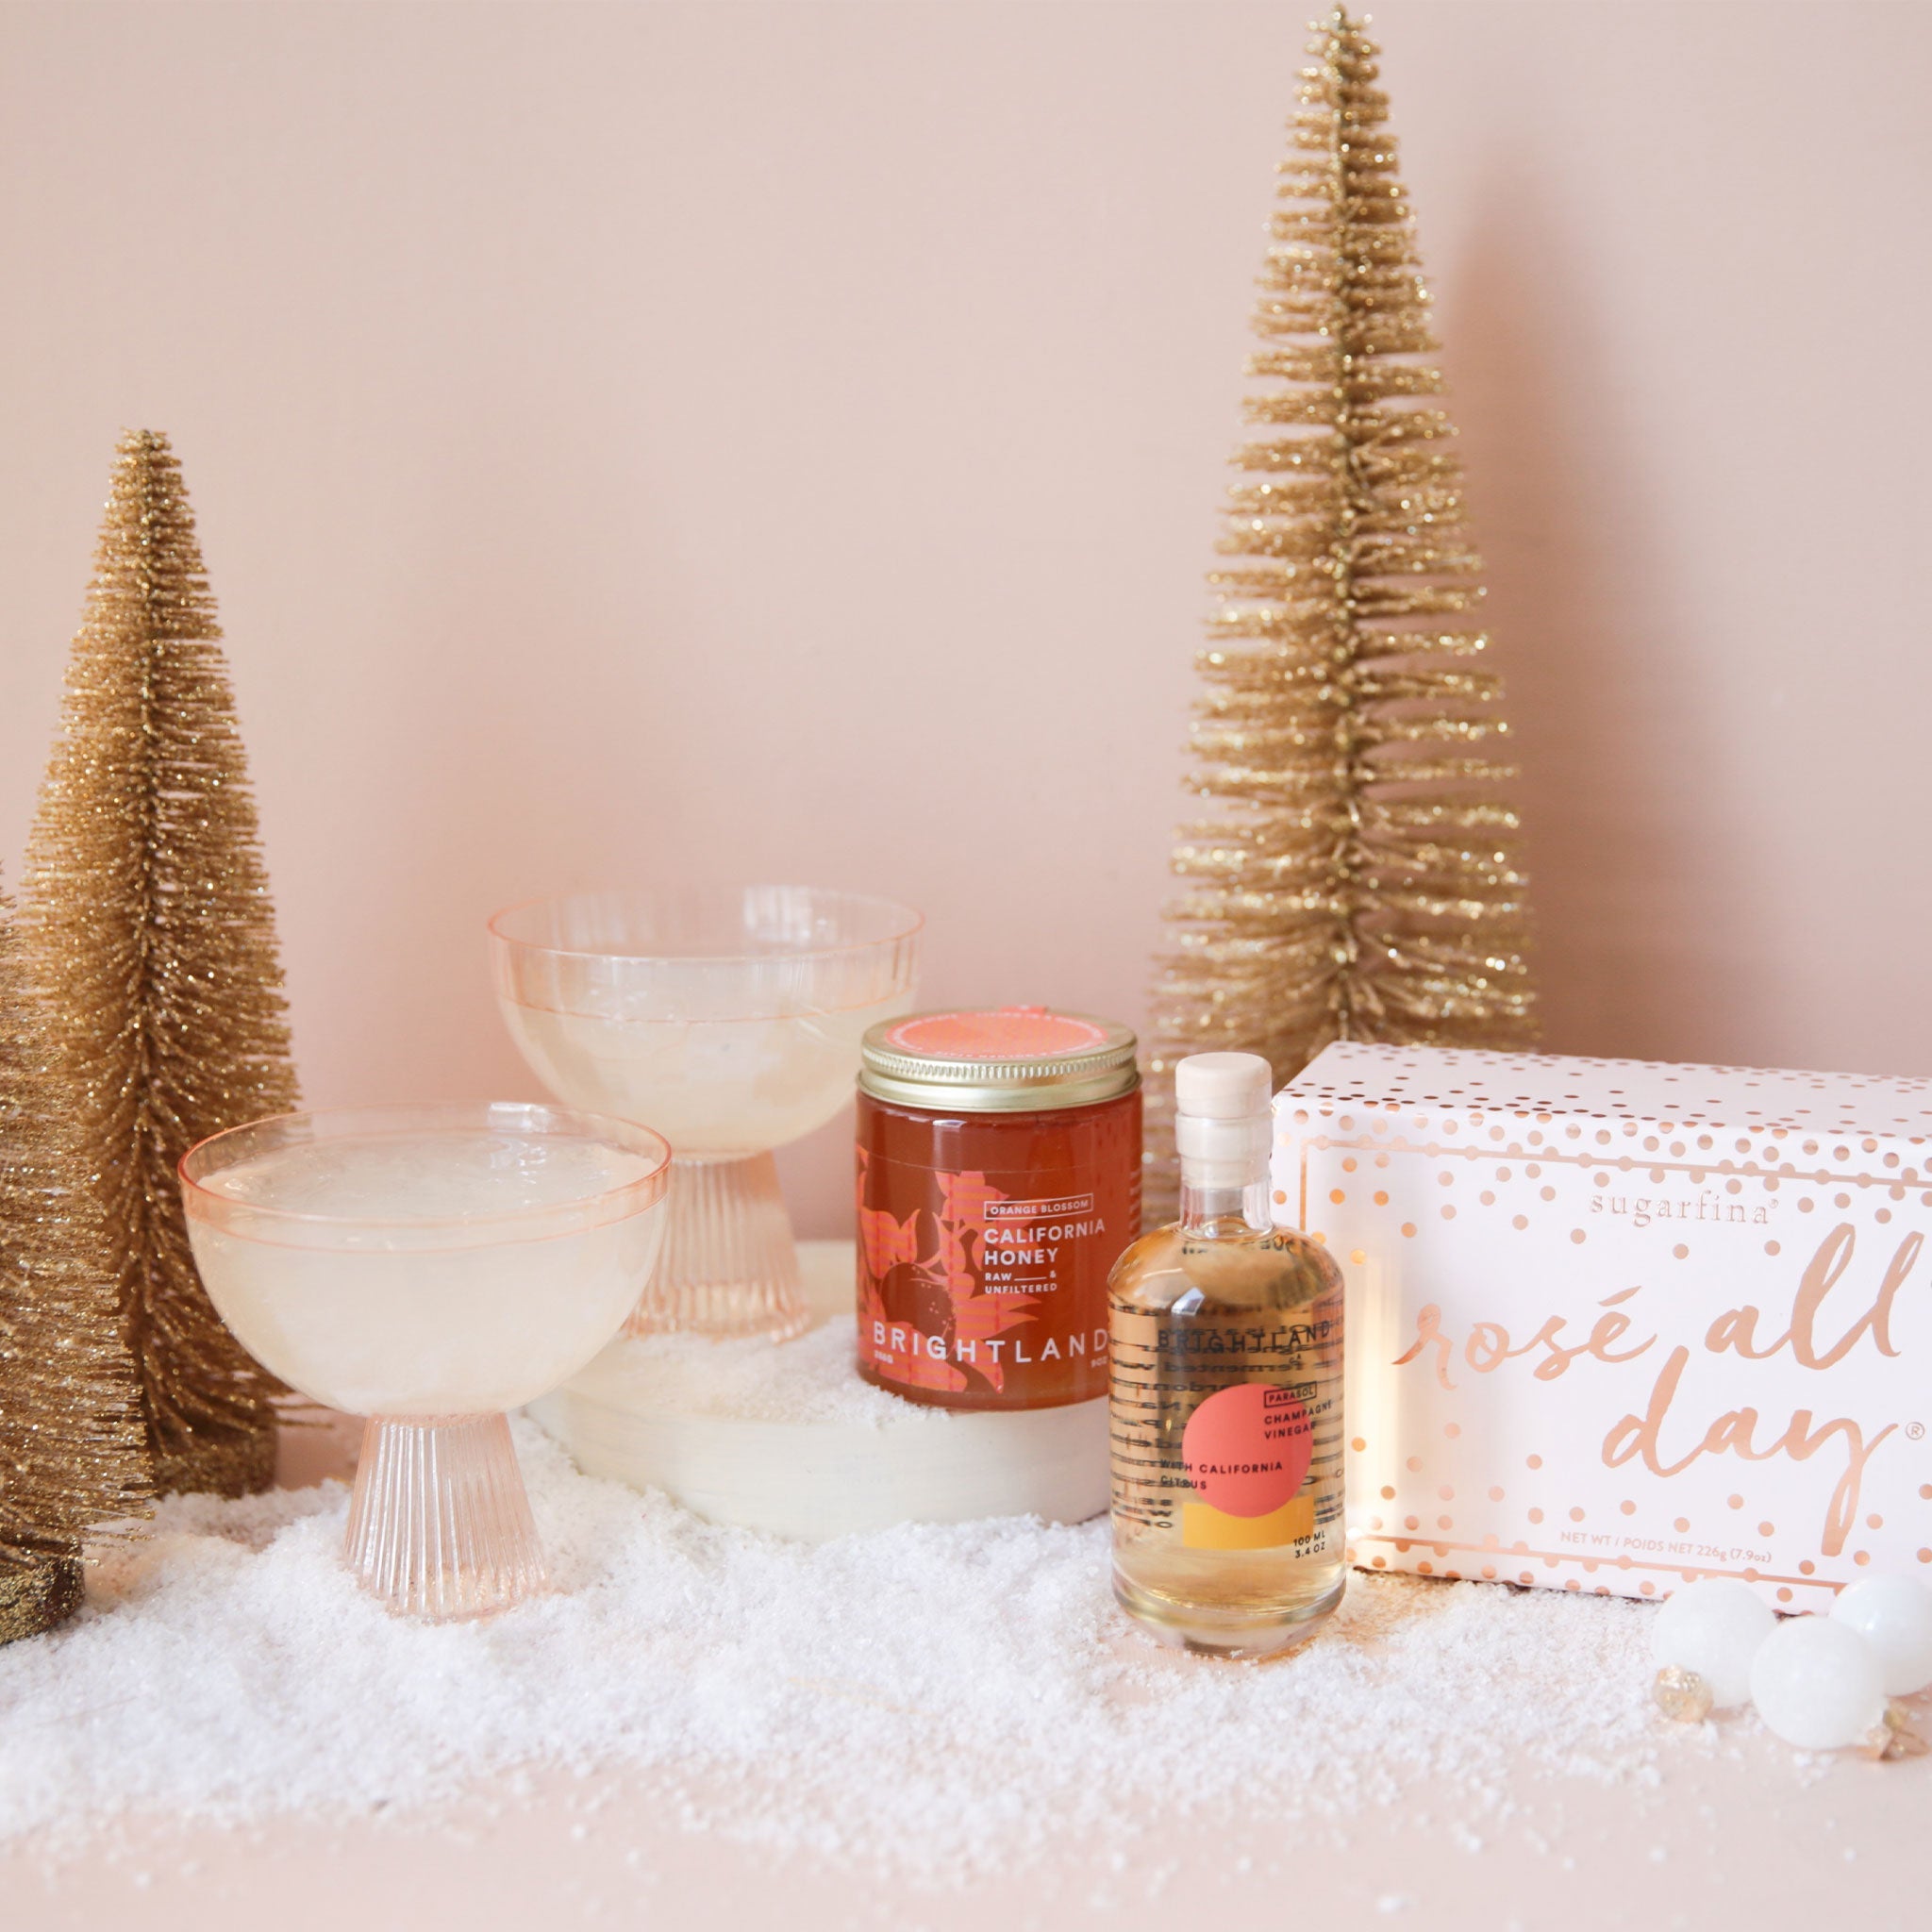 two coupe glasses filled with champagne, a small honey jar, a small jar of champagne vinegar, a pink rosé all day sugarfina gift box all on a soft pink ground with gold christmas trees and snow